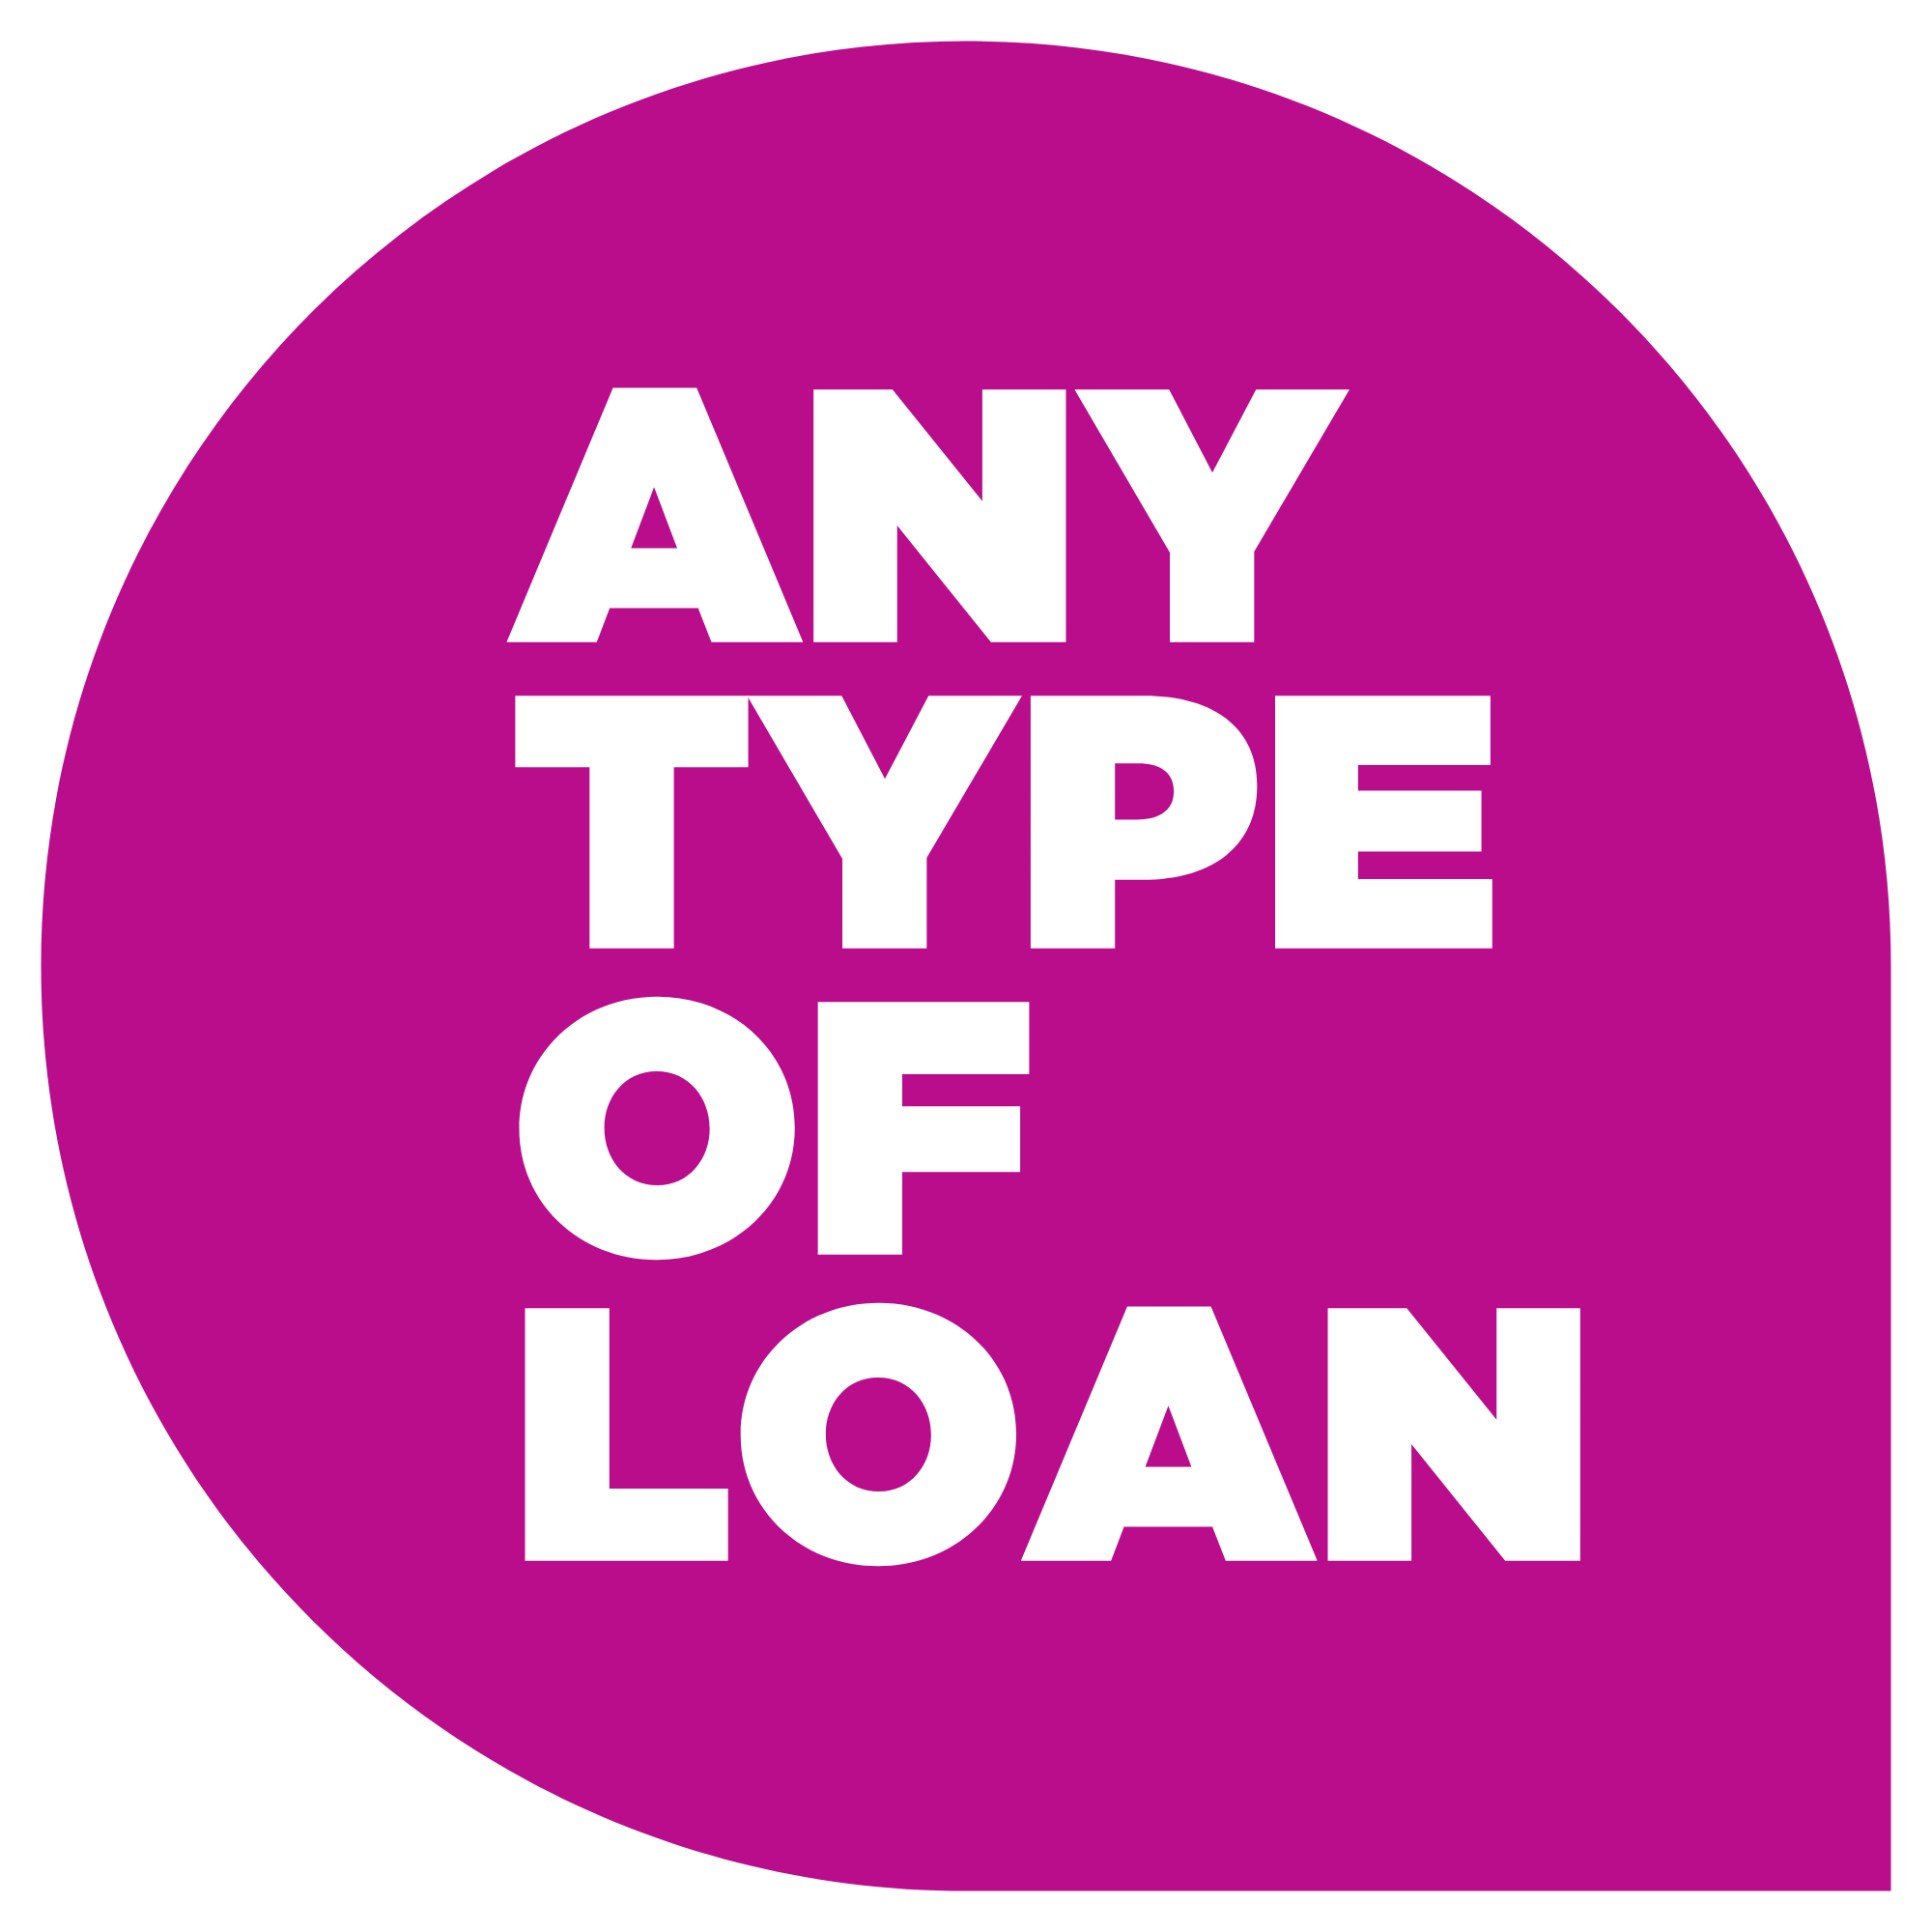 Any Type of Loan